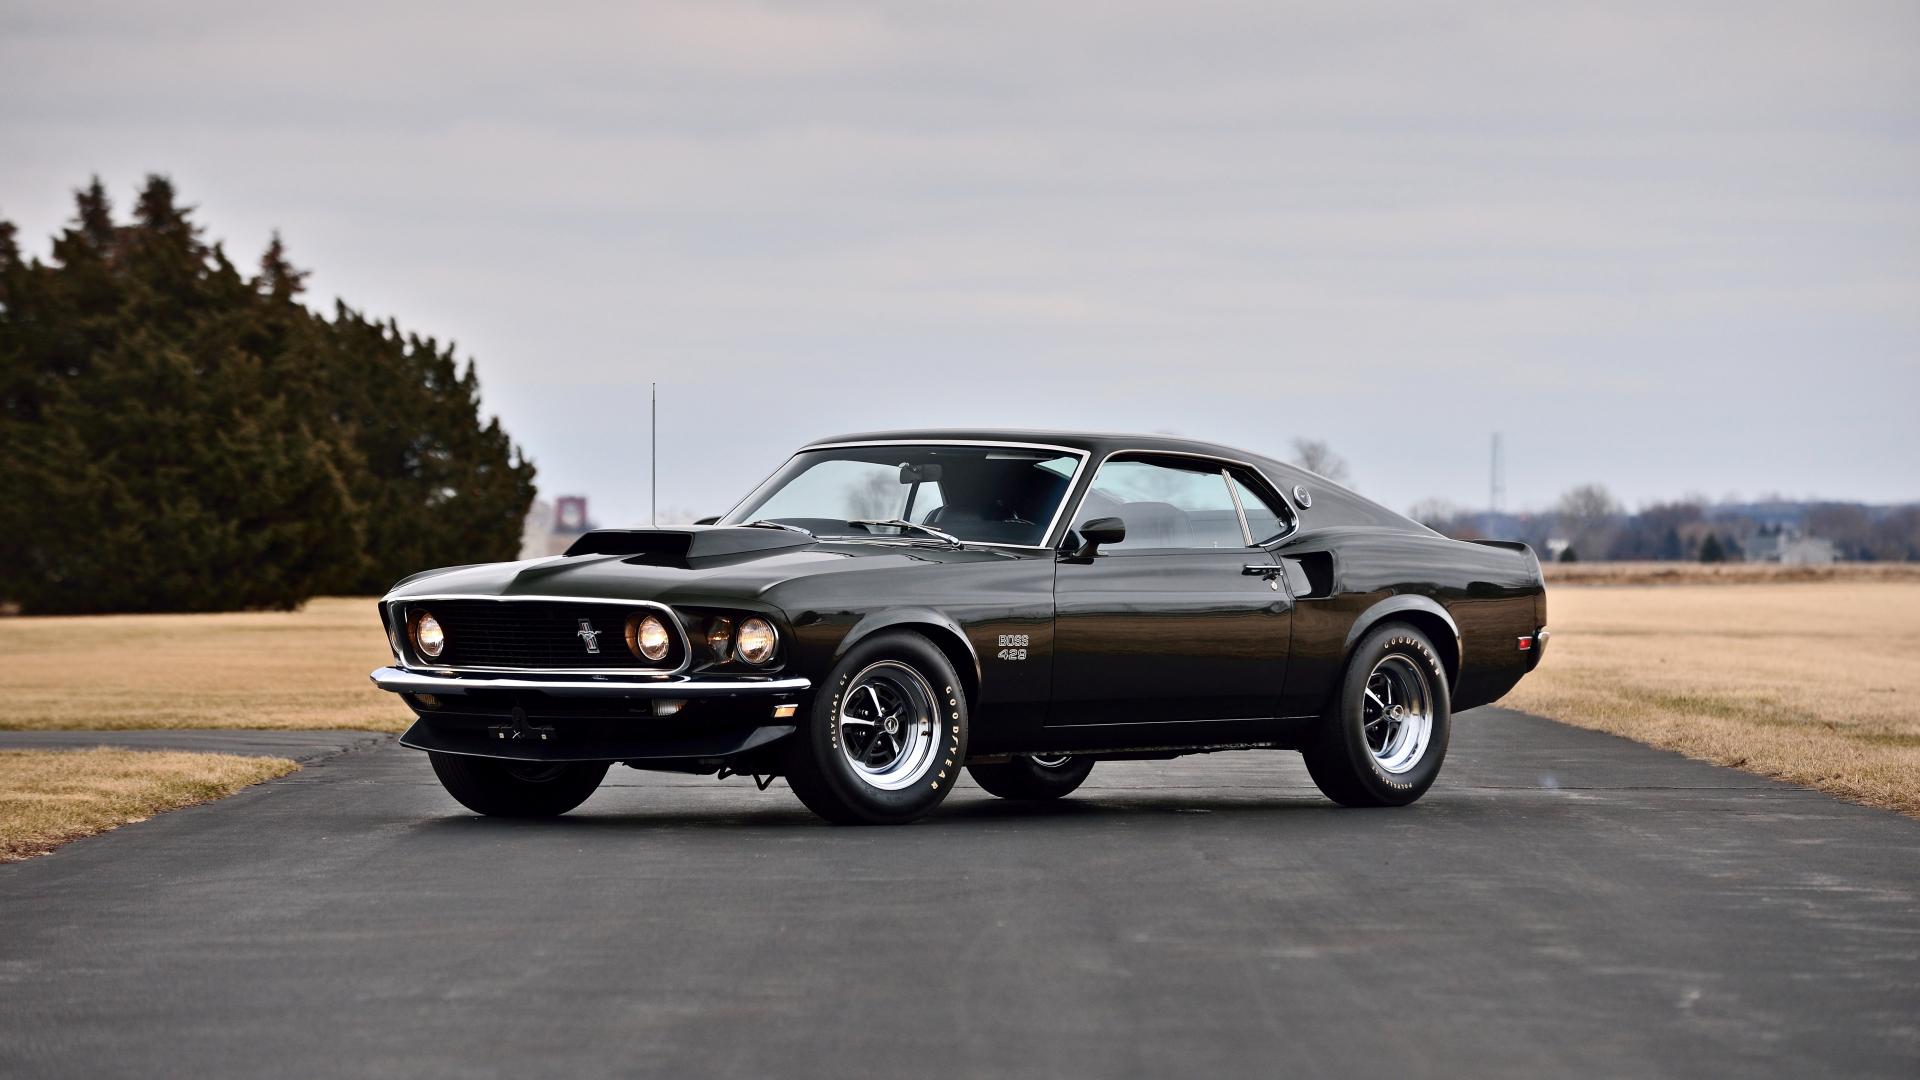 Download 1920x1080 wallpaper classic, black, muscle car, ford mustang ... Muscle Car Wallpaper 1920x1080